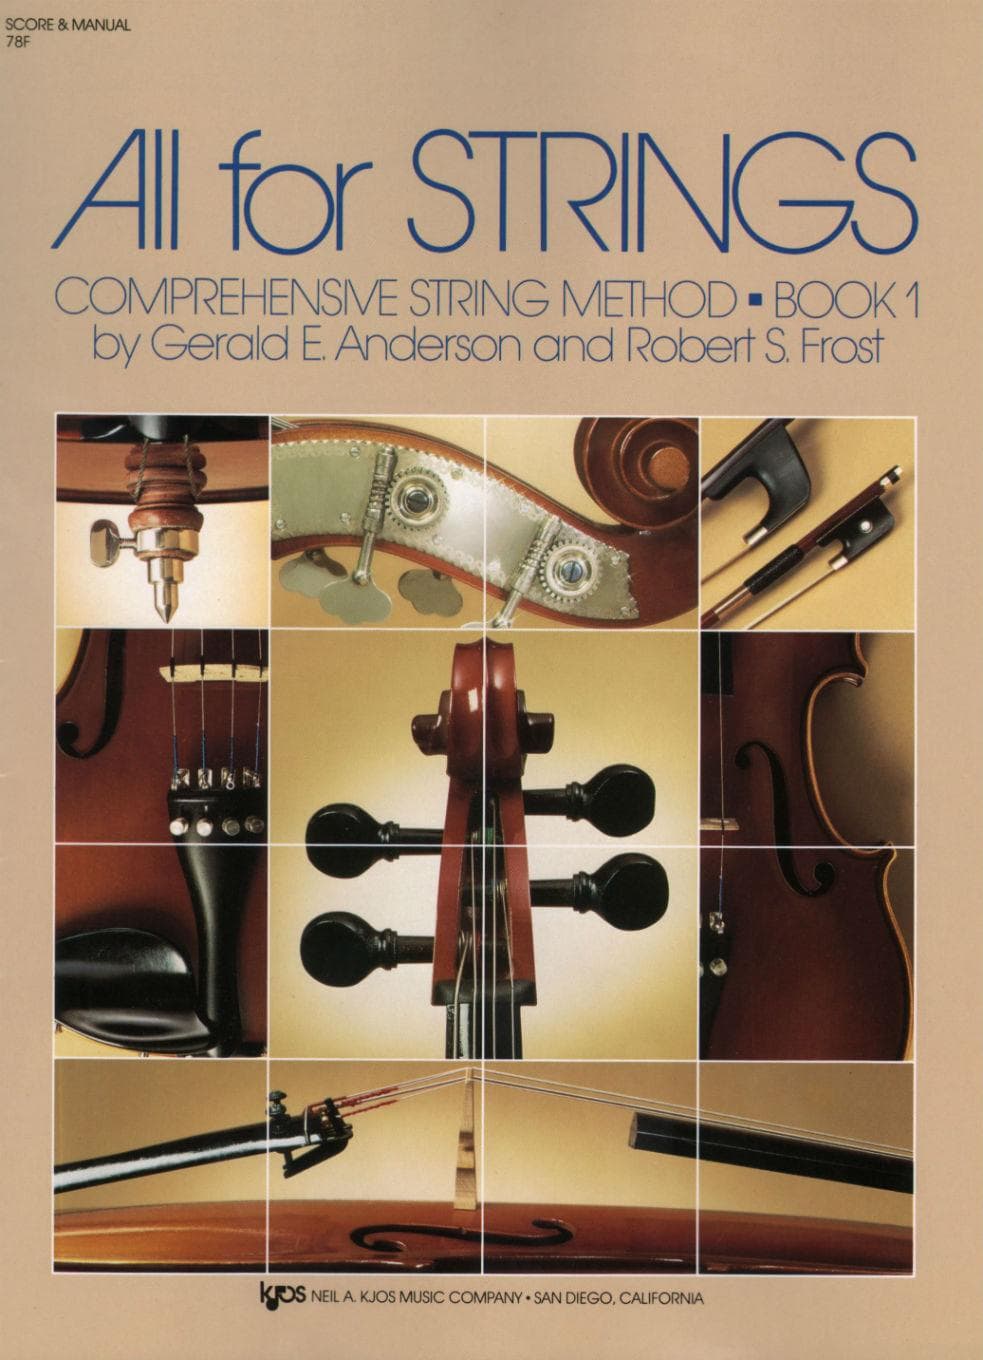 All For Strings Comprehensive String Method - Book 1 Score by Gerald E Anderson and Robert S Frost